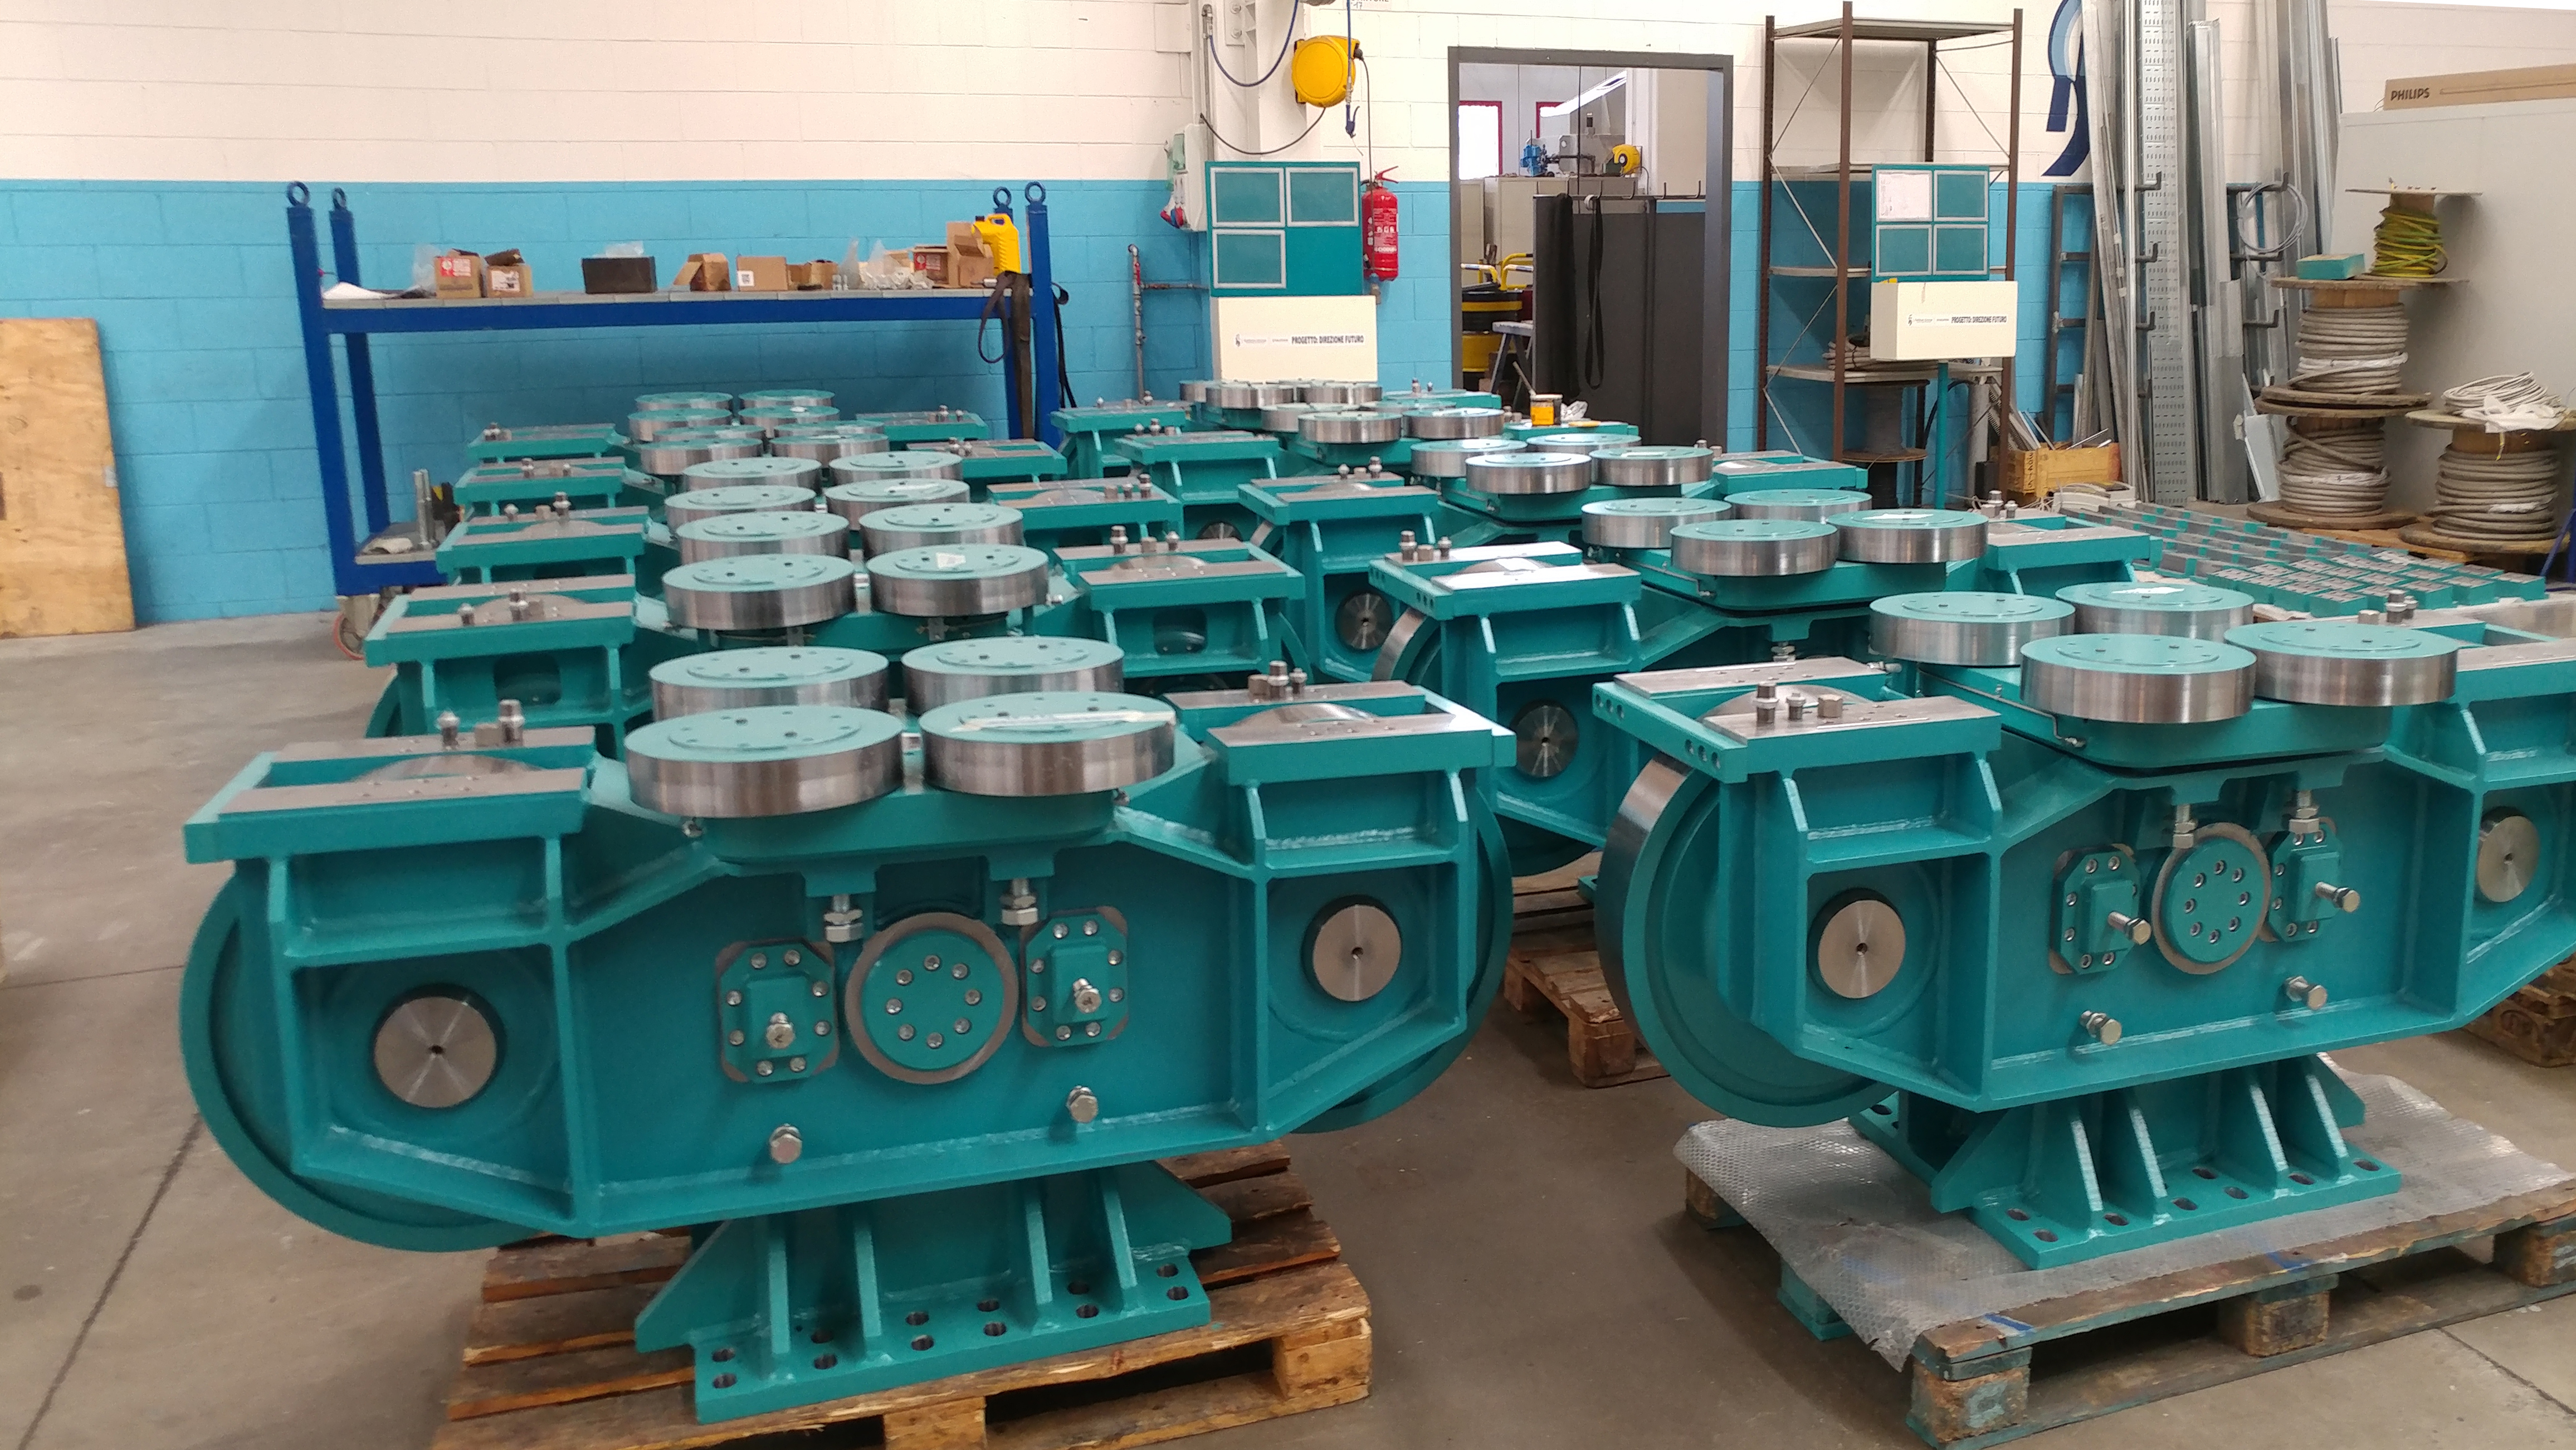 The completed 15 bogie wheel assemblies (14 are used by the LSST dome, with 1 spare). These were all inspected at the EIE fabrication vendor Galbiati Group in Lecco, Italy.